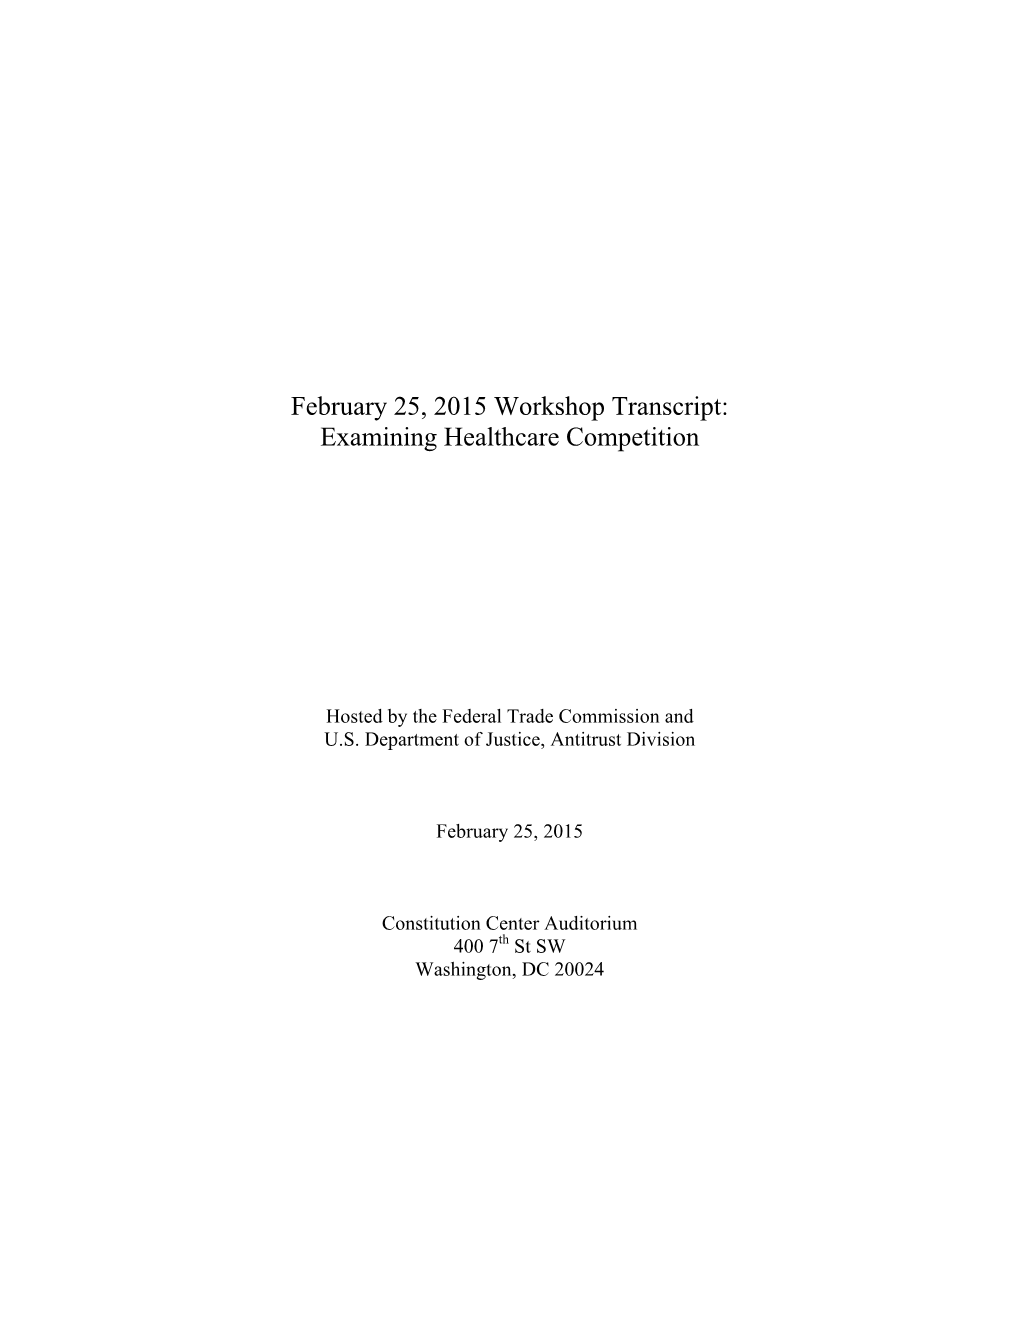 February 25, 2015 Workshop Transcript: Examining Healthcare Competition